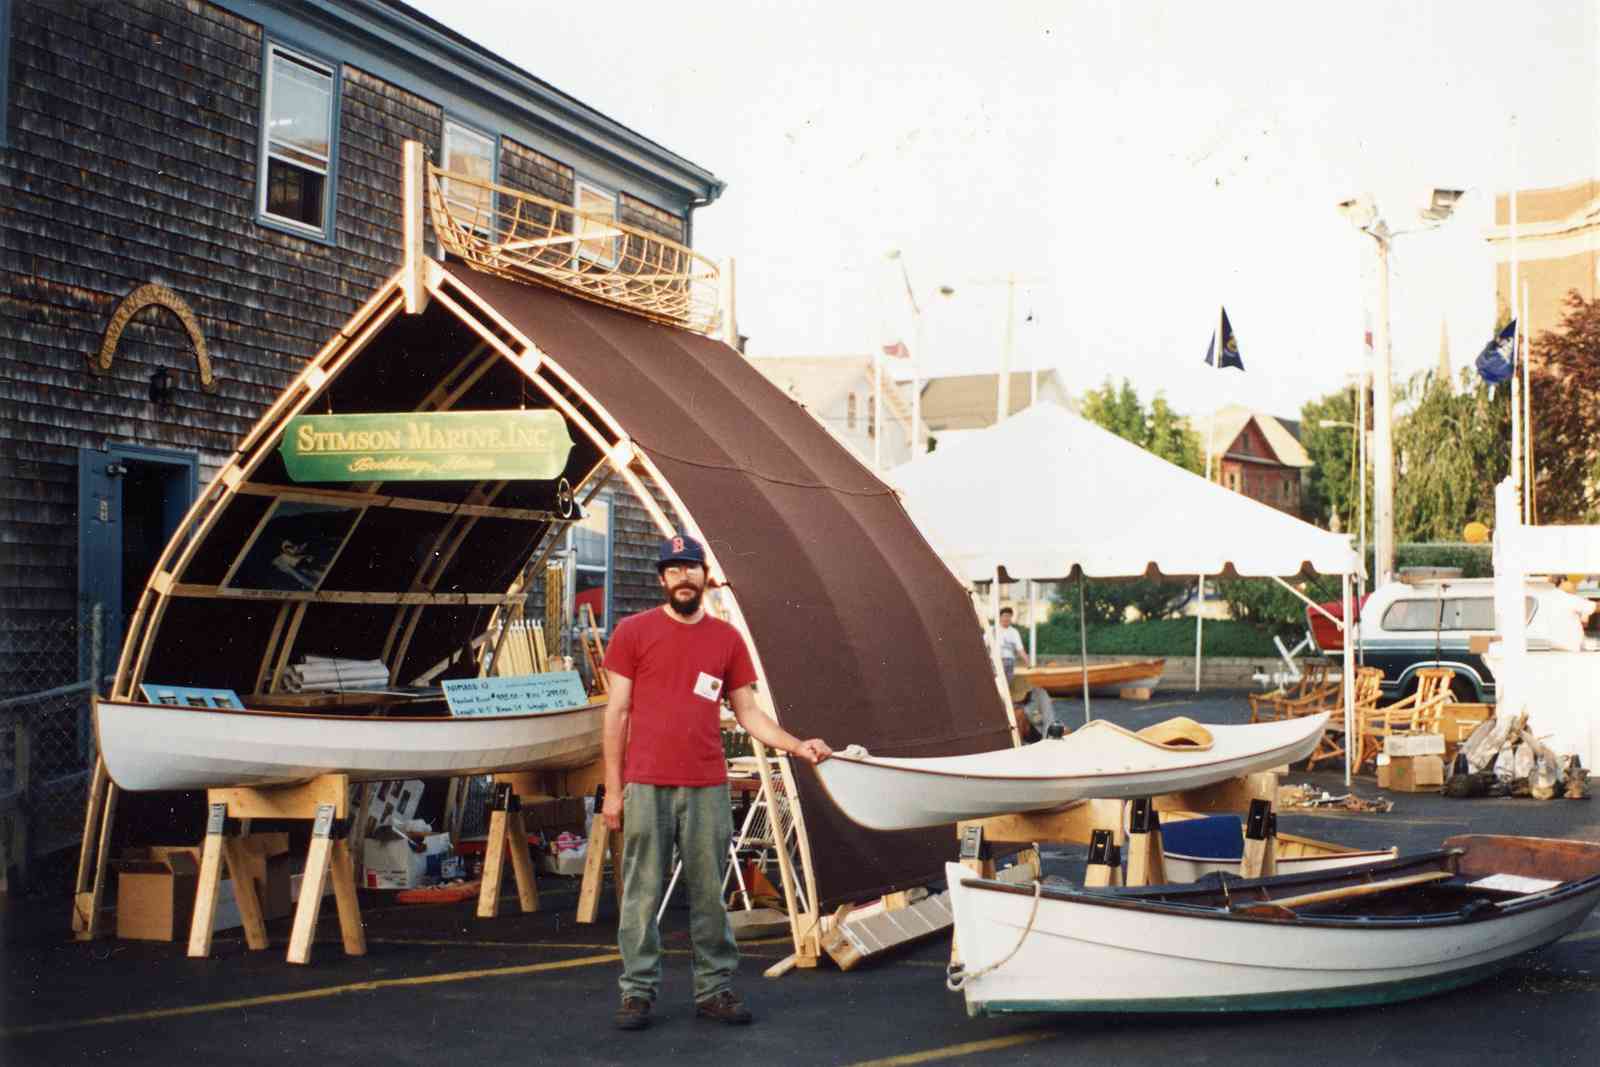 Stimson Marine Booth at the Newport, RI WoodenBoat show in 1992, featuring Bow-Roof shed